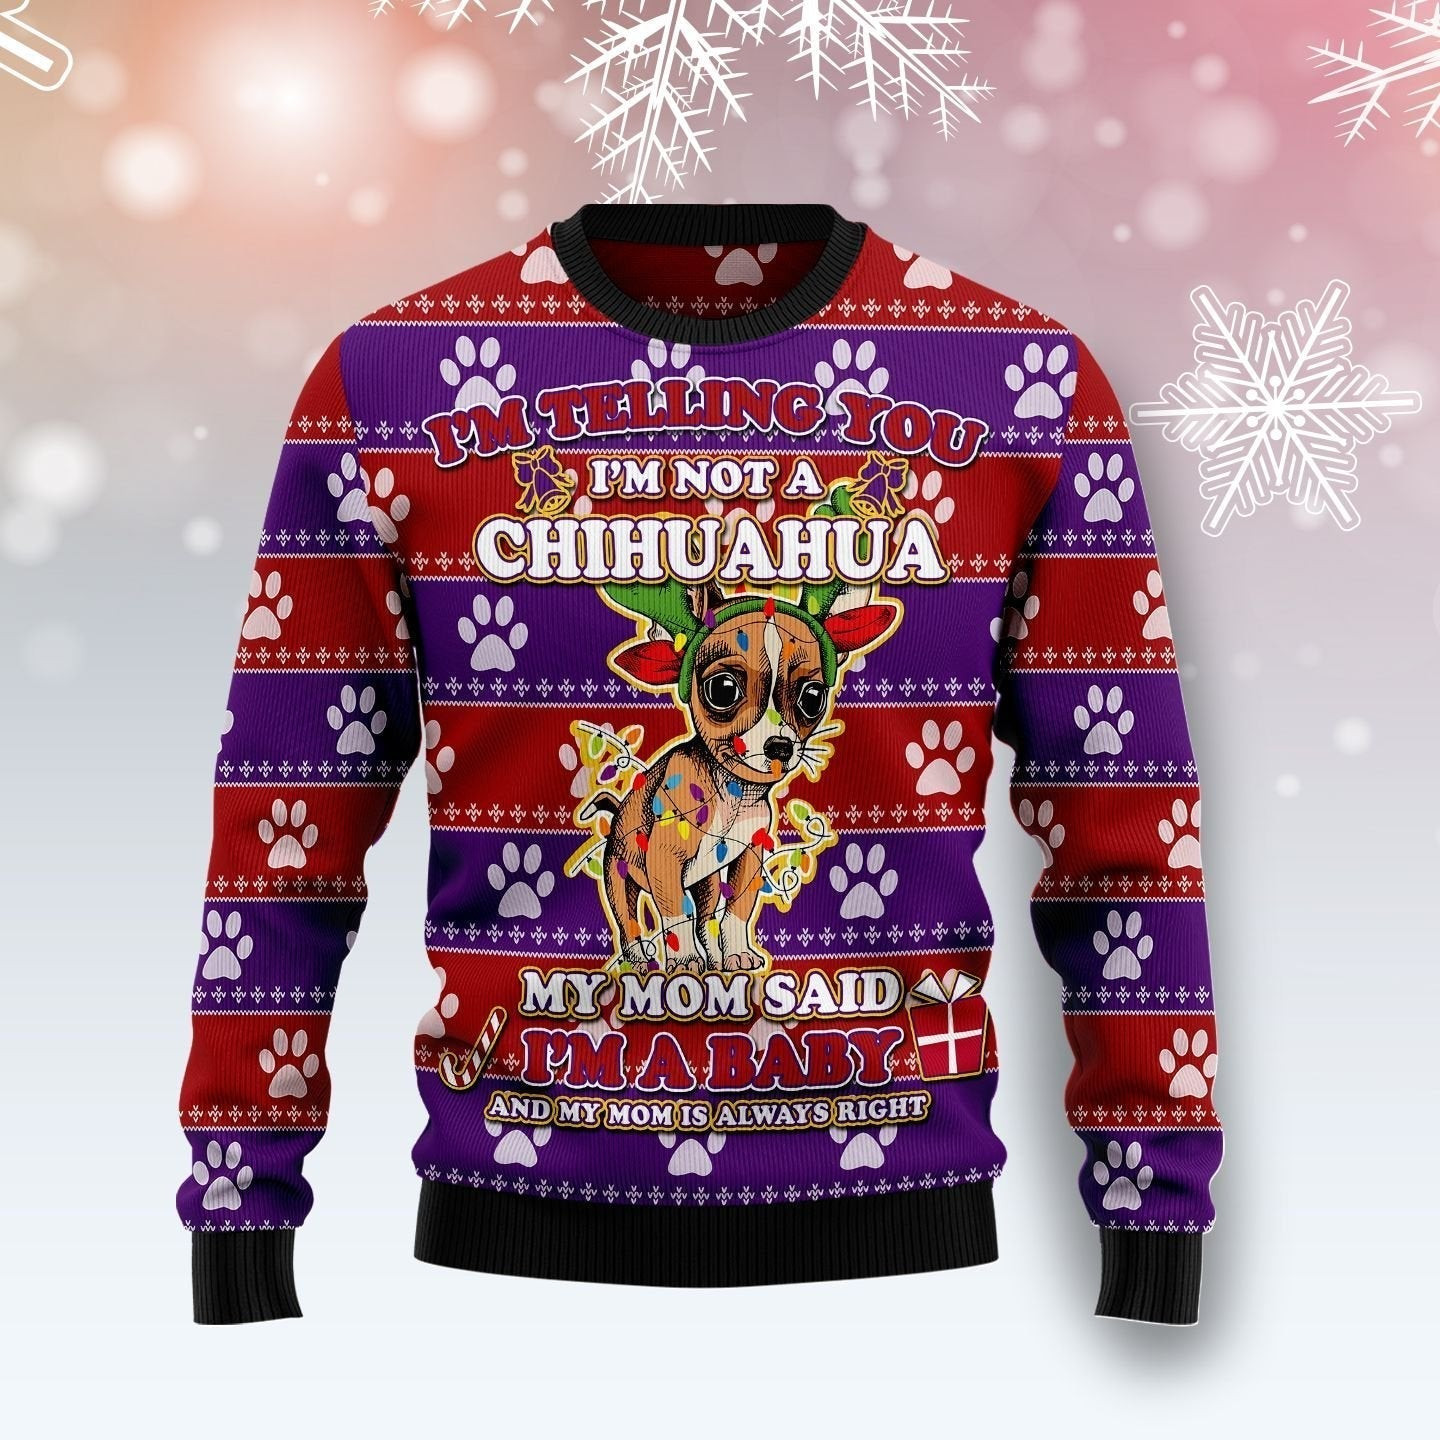 Chihuahua Baby Christmas Ugly Christmas Sweater Ugly Sweater For Men Women